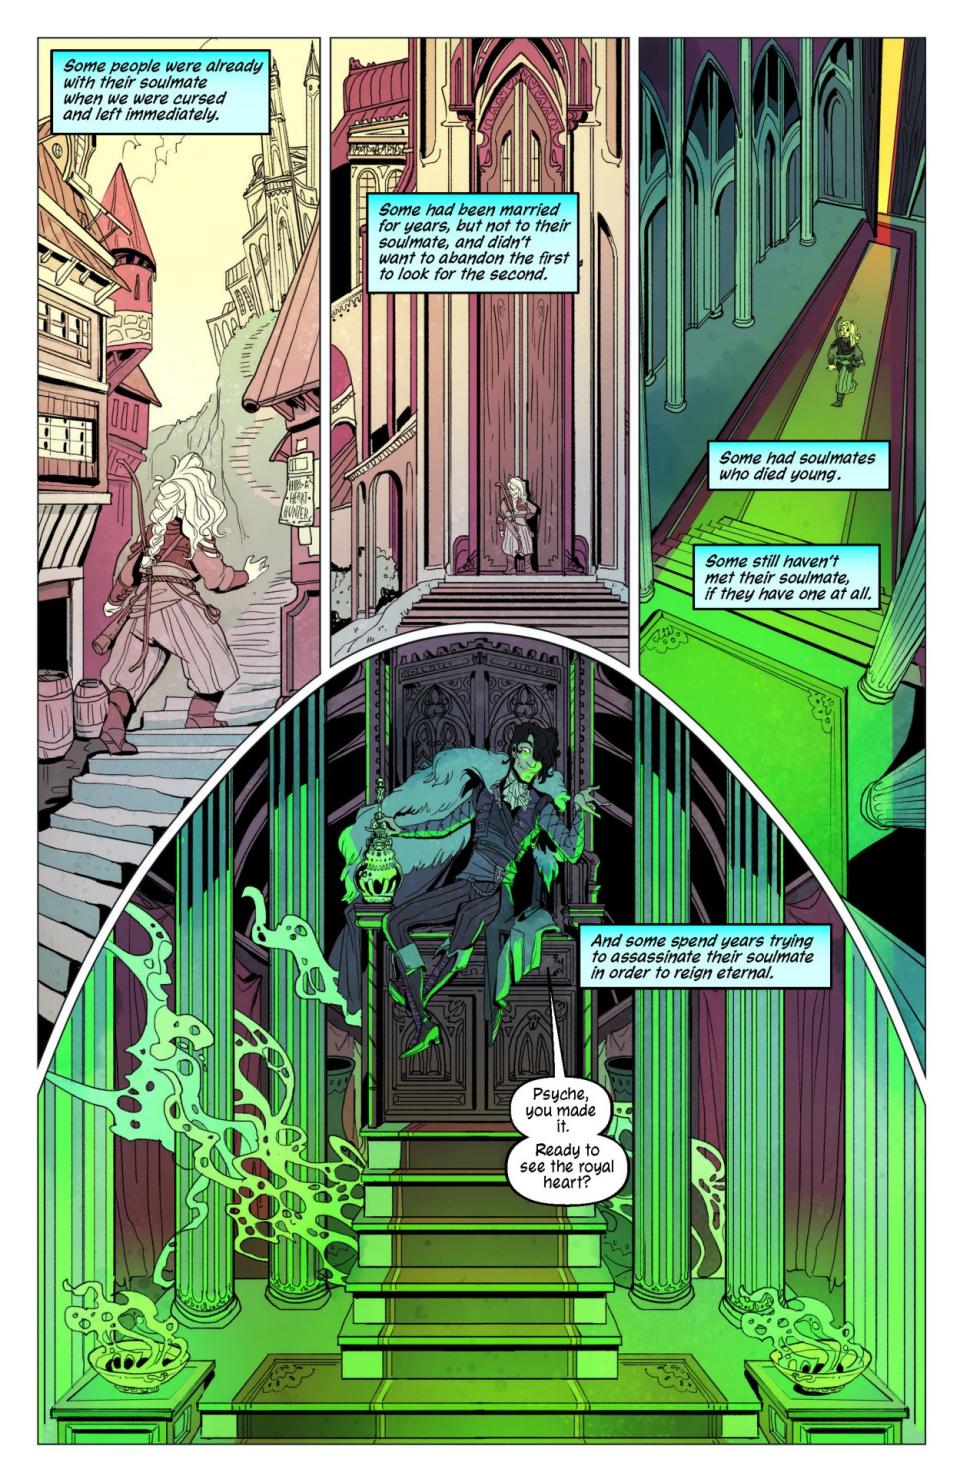 The Heart Hunter graphic novel preview page depicting the story of a curse